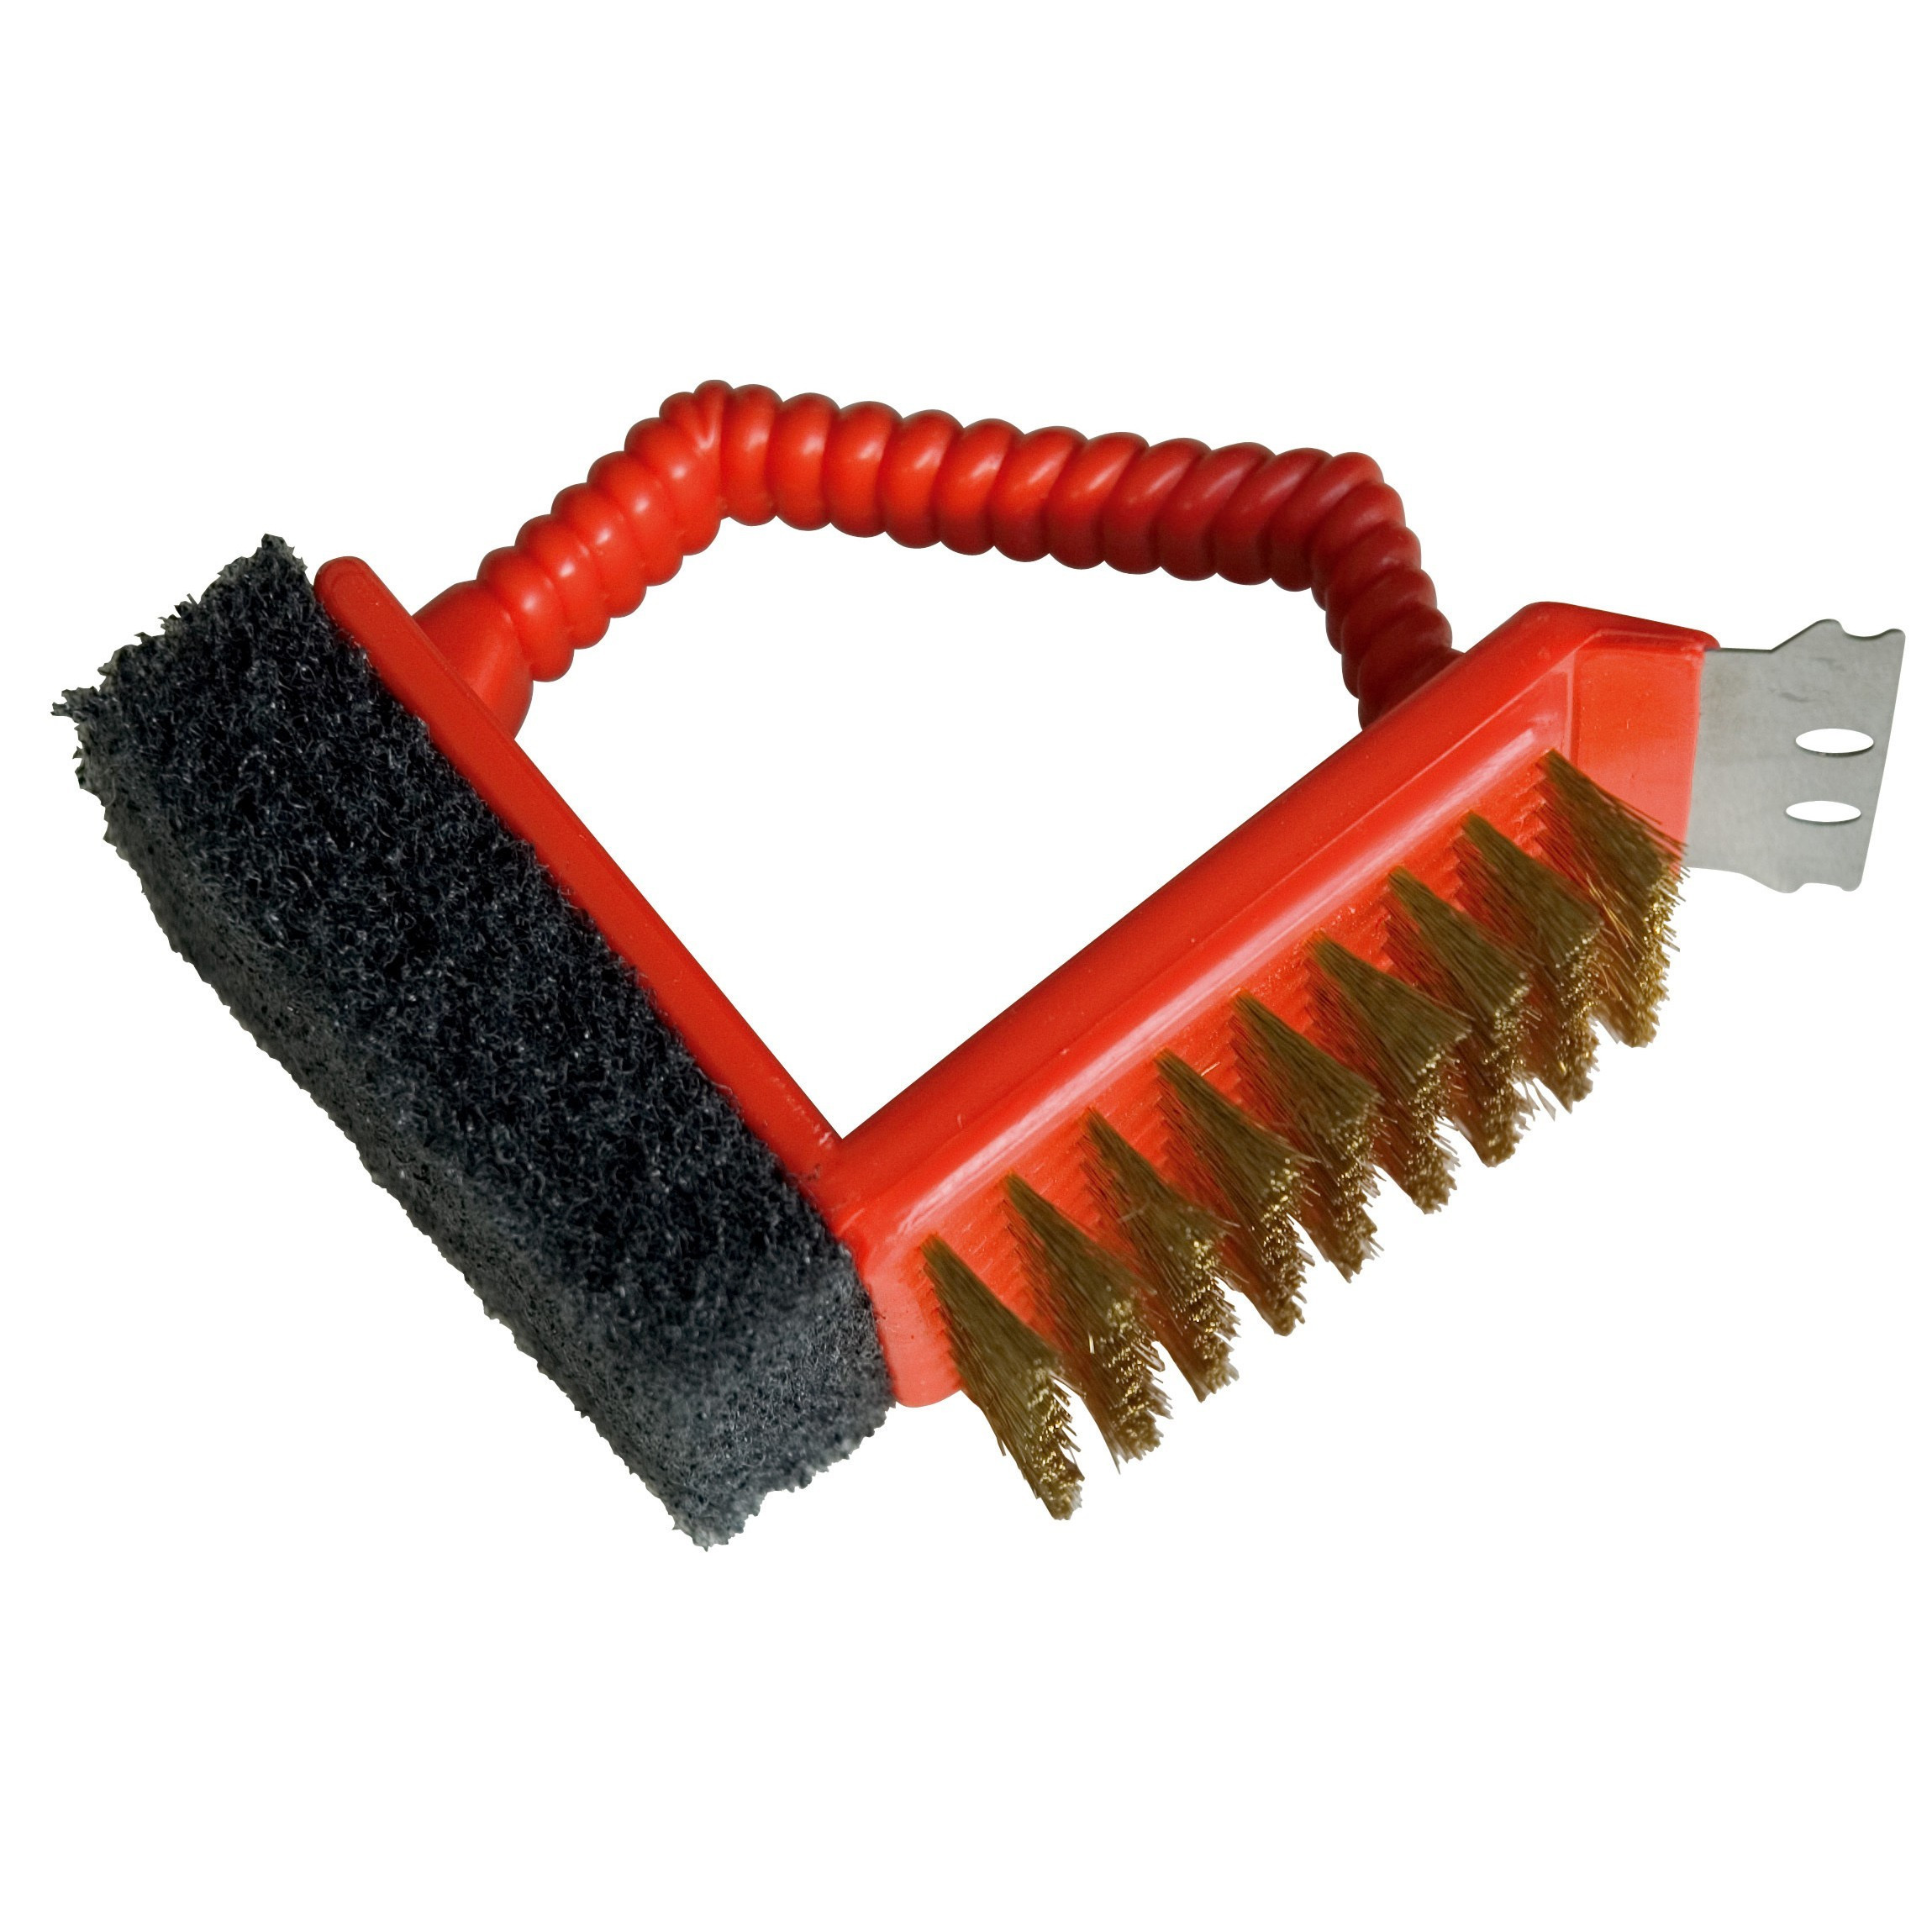 3 in 1 barbecue brush - Barbecook